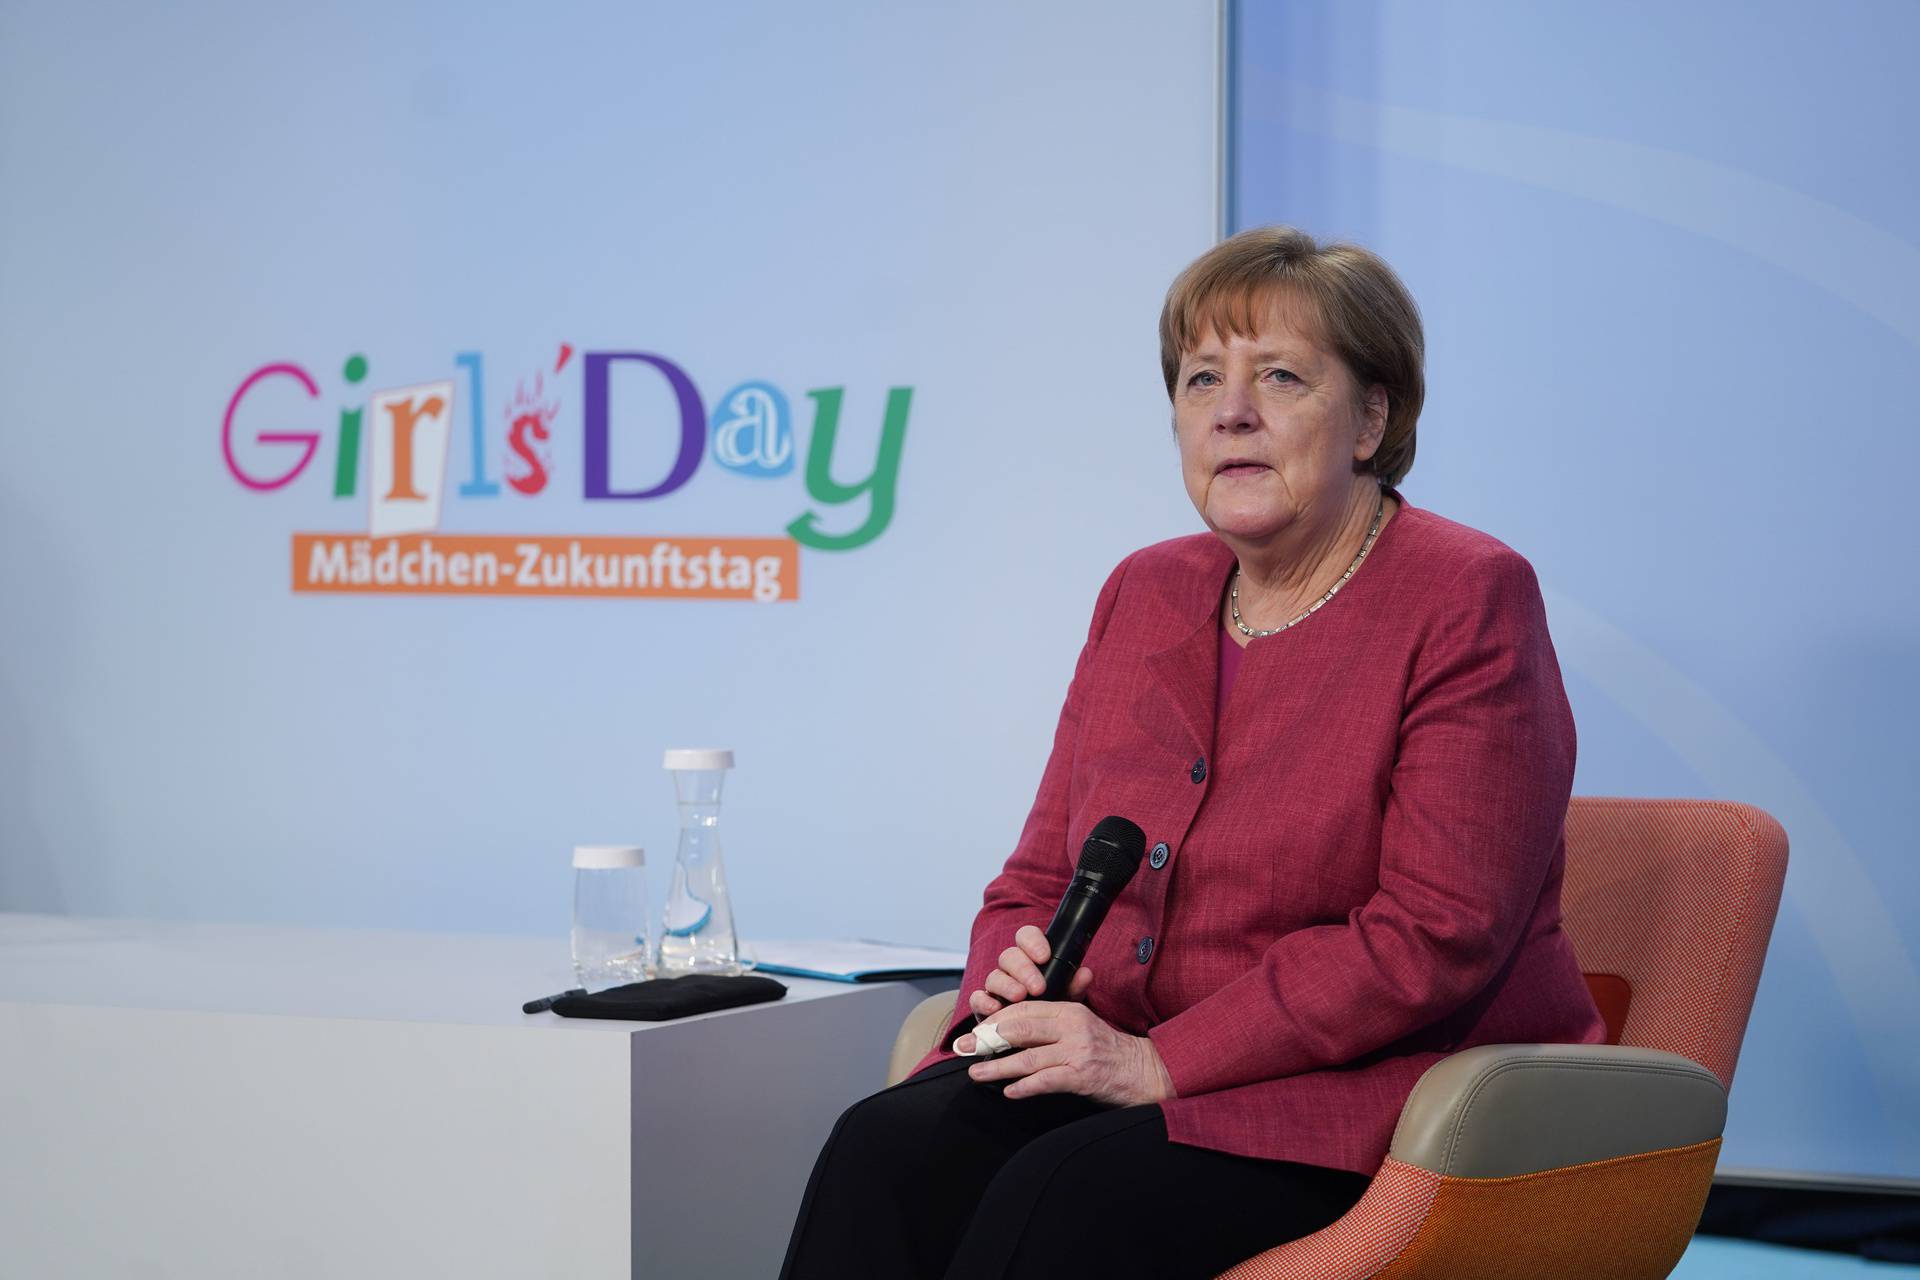 Online launch event for Girls' Day 2021